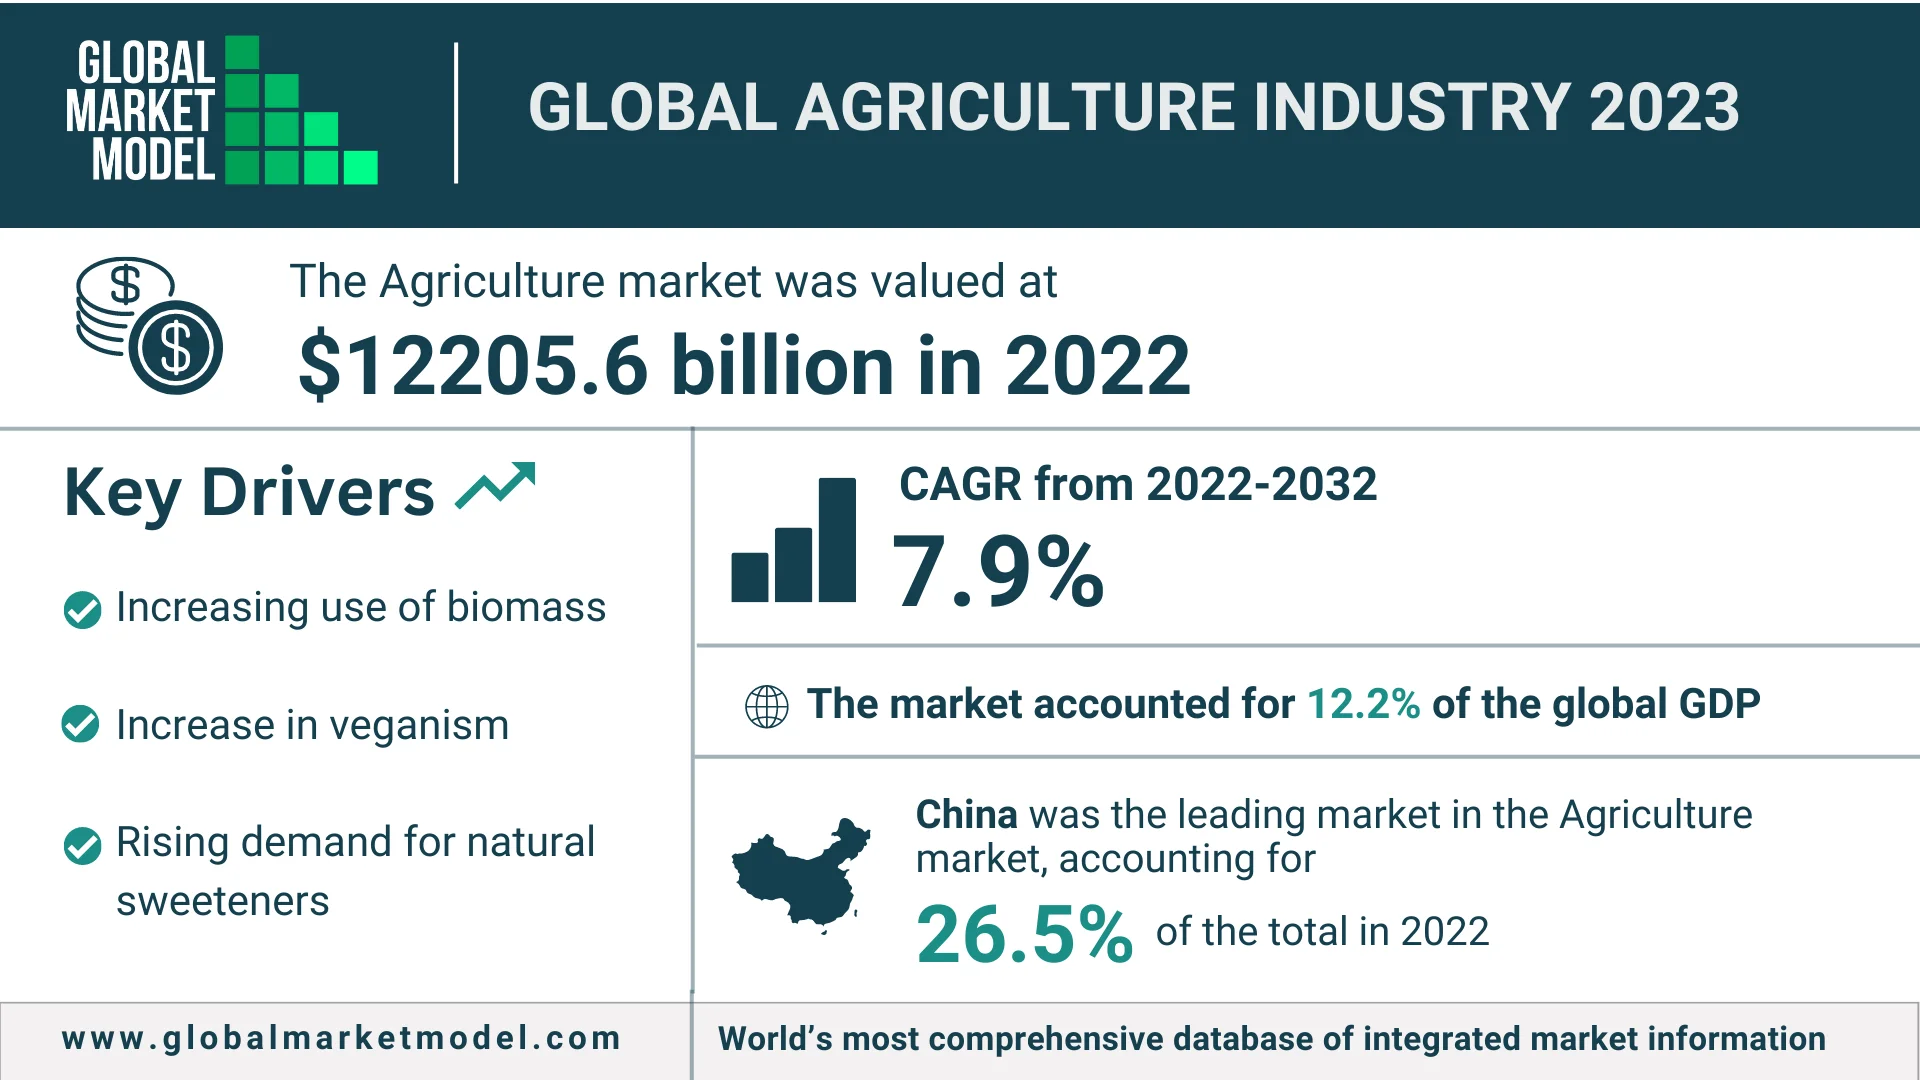 Global Agriculture Industry 2023